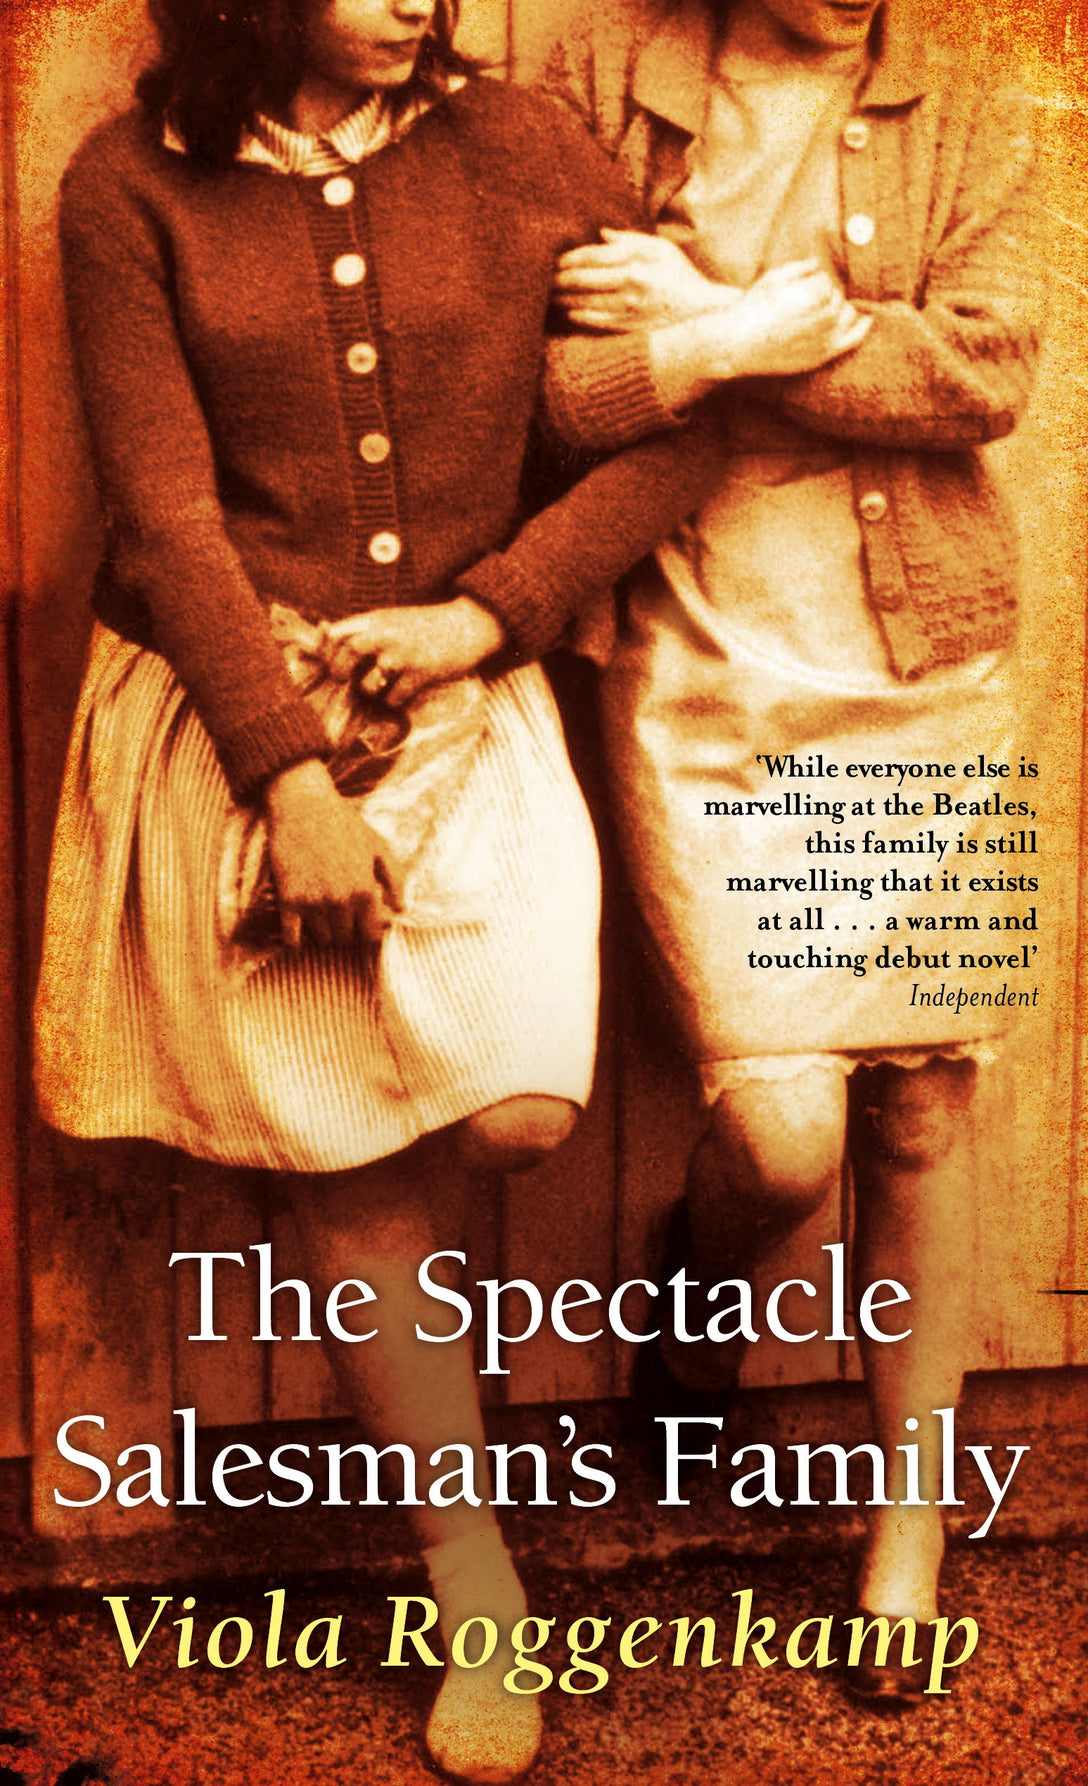 The Spectacle Salesman's Family by Viola Roggenkamp